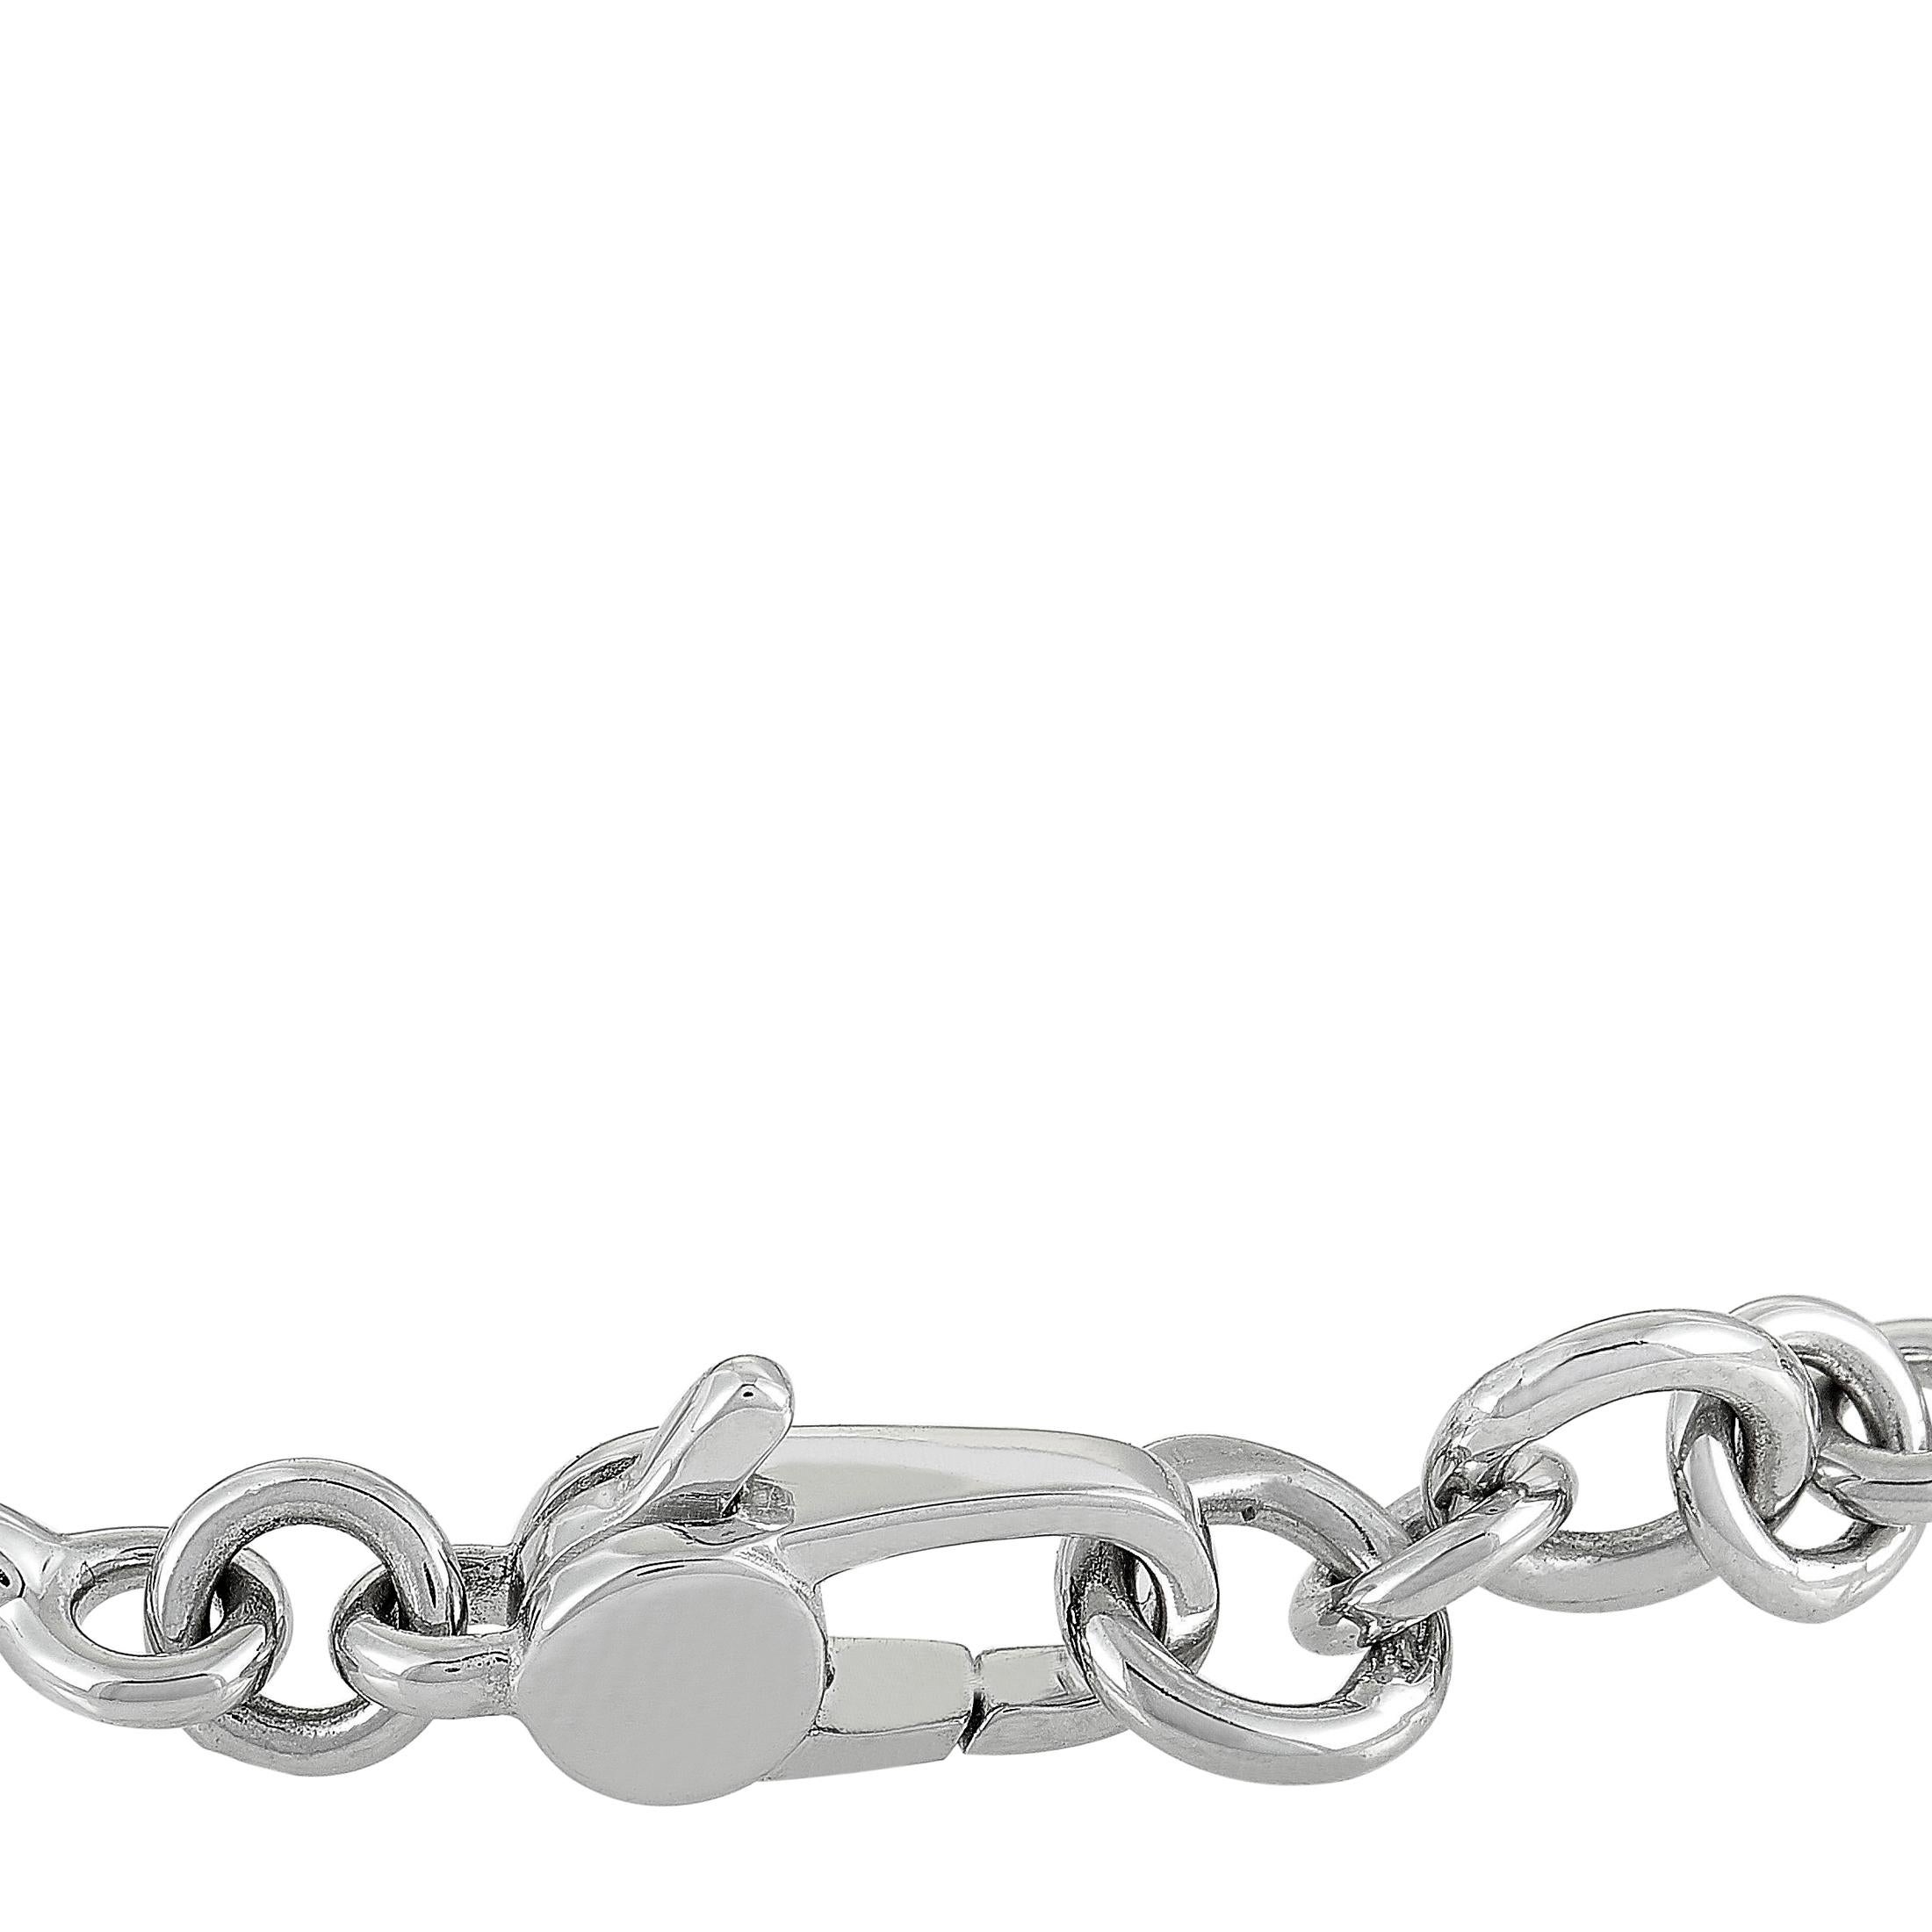 The Gucci “Horsebit” bracelet is made out of 18K white gold and diamonds that total 1.01 carats. The bracelet weighs 23 grams and measures 6.75” in length.
 
 This jewelry piece is offered in brand new condition and includes the manufacturer’s box